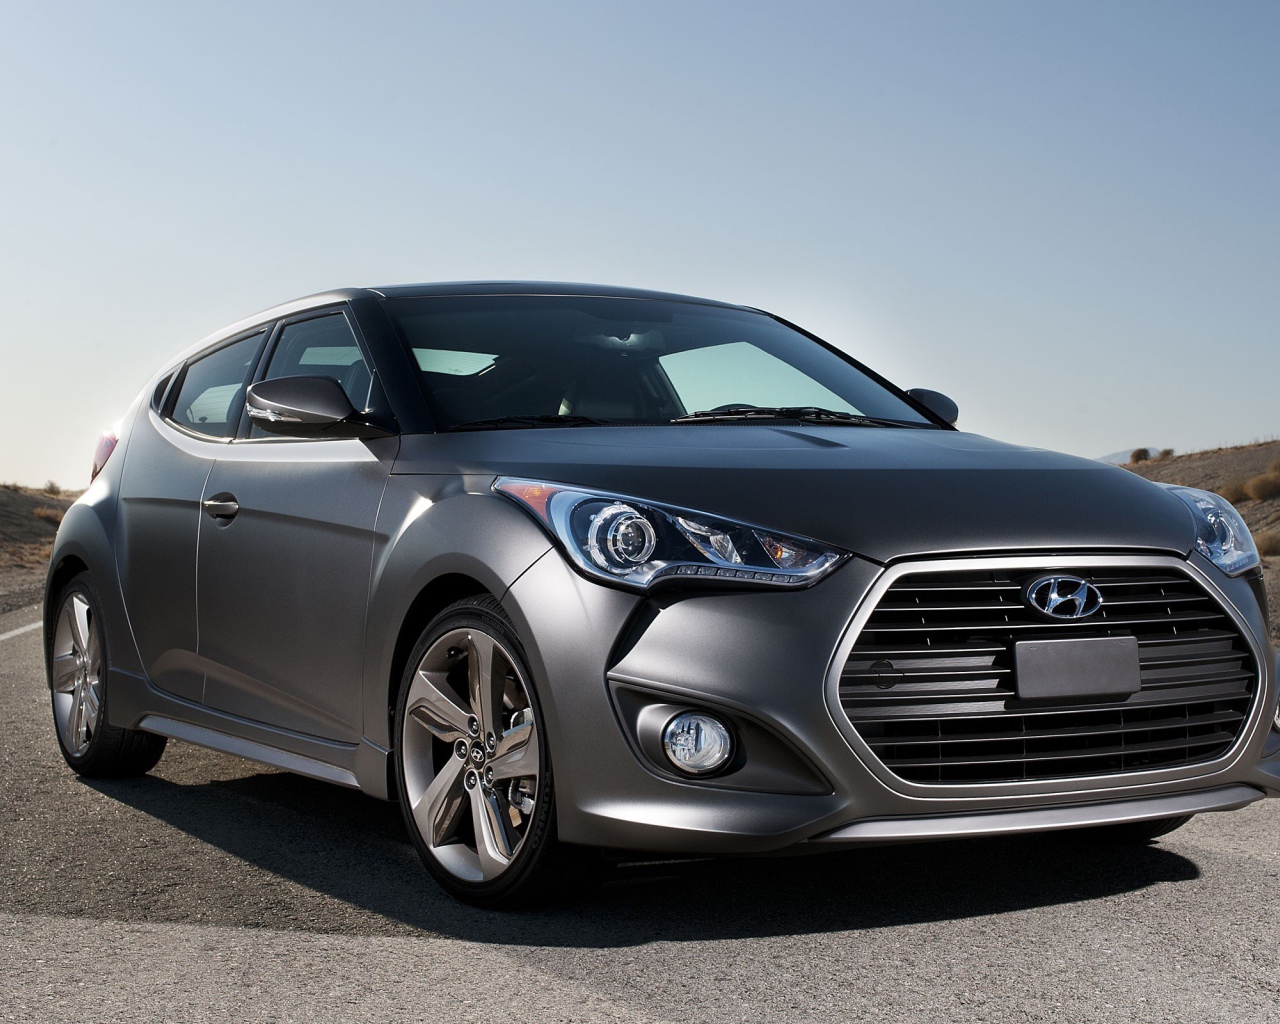 Car Hyundai Veloster on the highway